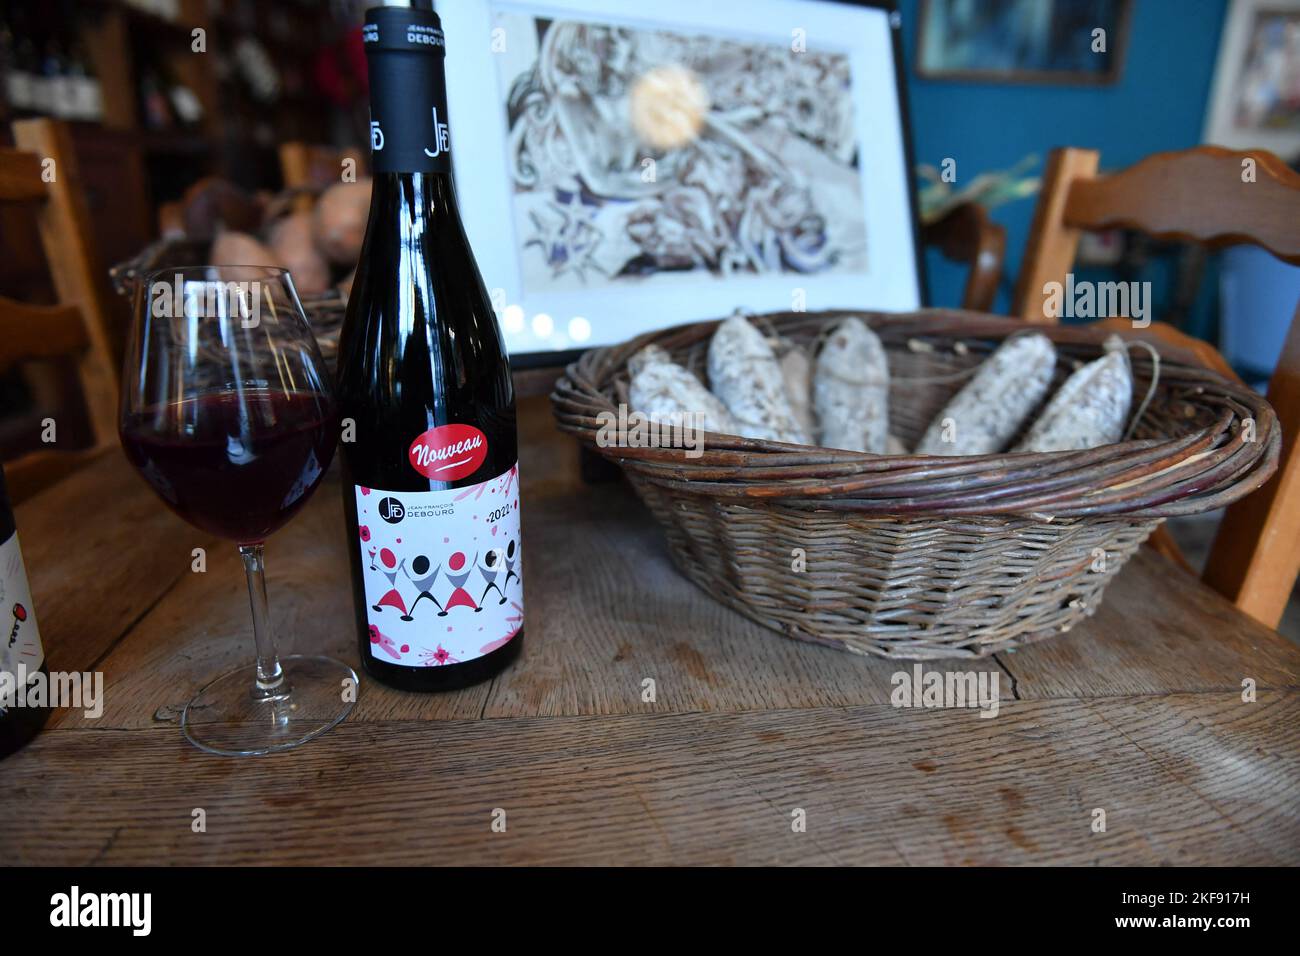 Wine fans celebrate the Beaujolais Nouveau's arrival in a bistrot on  November 17, 2022 in Paris, France. Beaujolais Nouveau is a red wine made  from Gamay grapes produced in the Beaujolais region